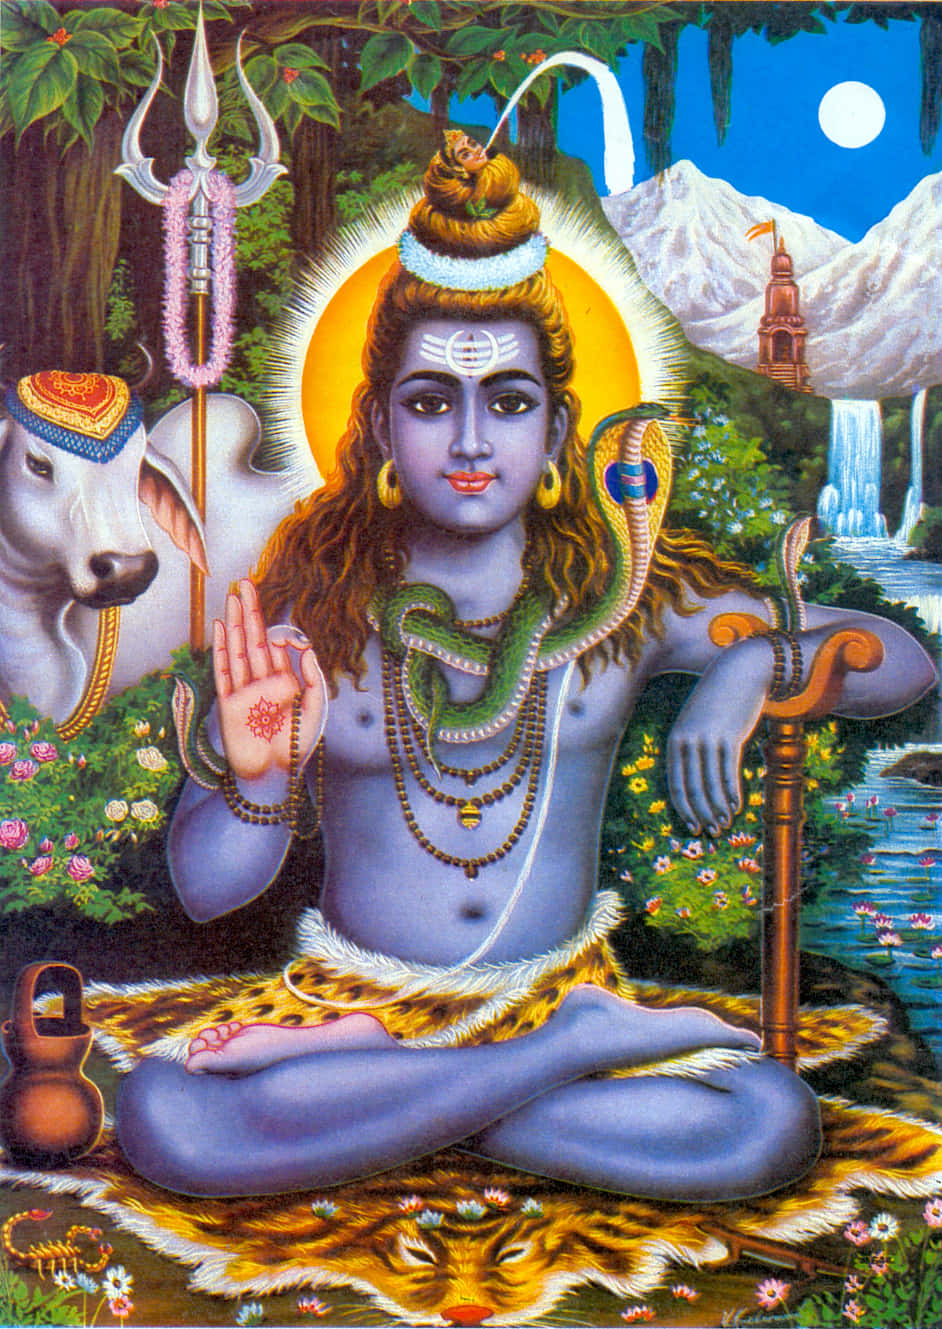 ”The Power of Lord Shiva”